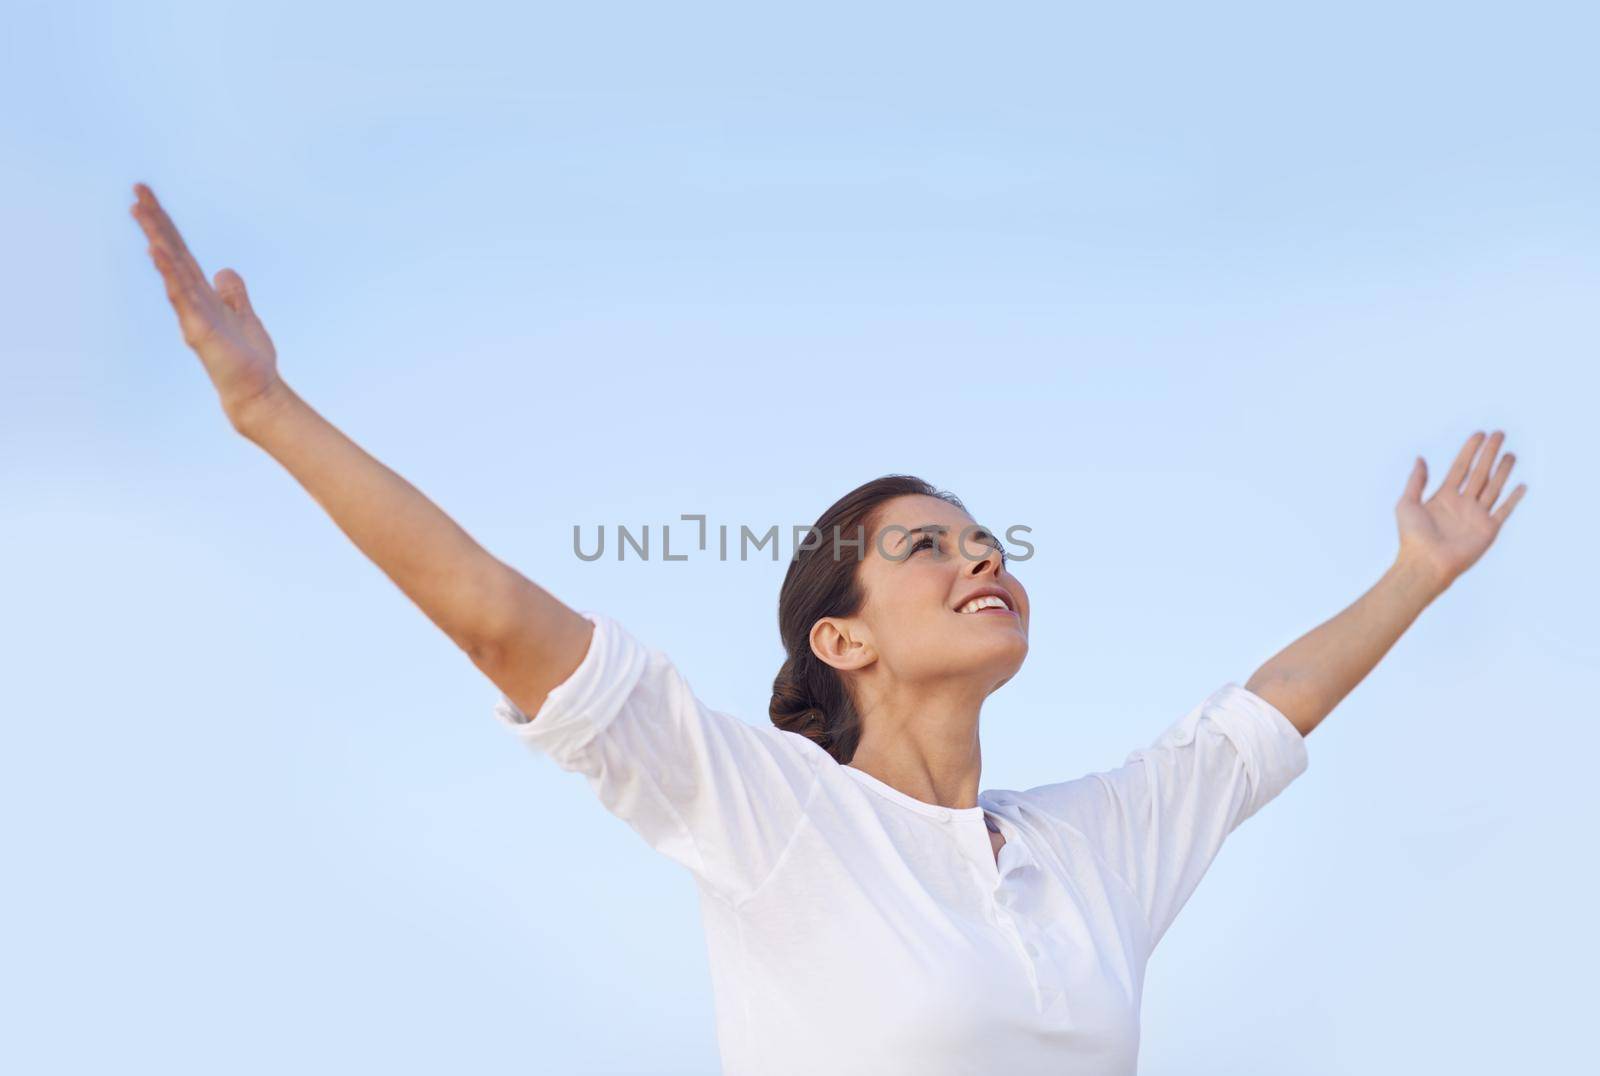 Feel the freedom. A young woman standing with her arms outstretched